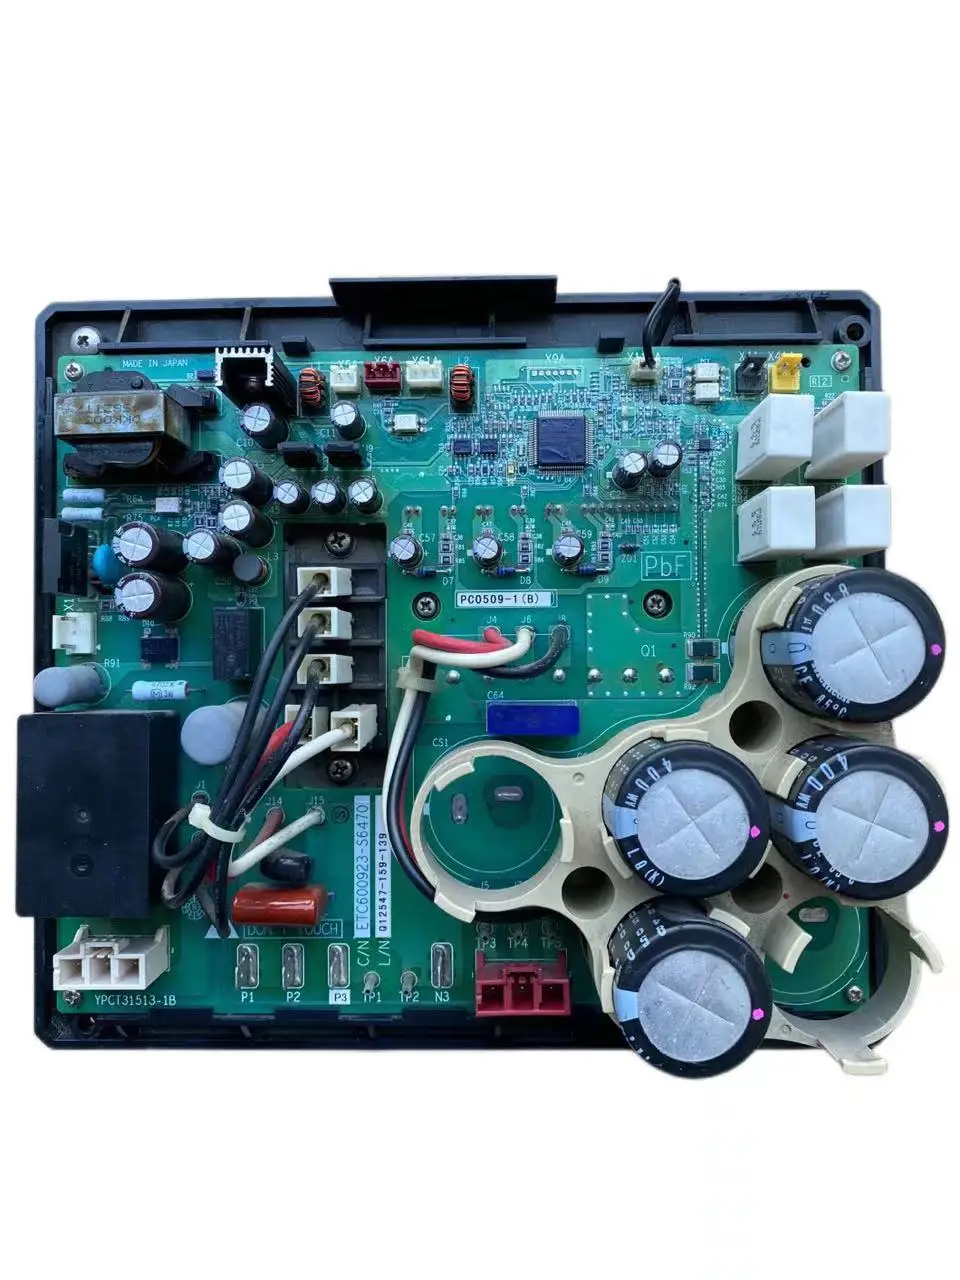 

Applicable to Daikin Central Air Conditioning RHXYQ14QY1 Compressor Drive Variable Frequency Module Board PC0509-1 (B) (C)